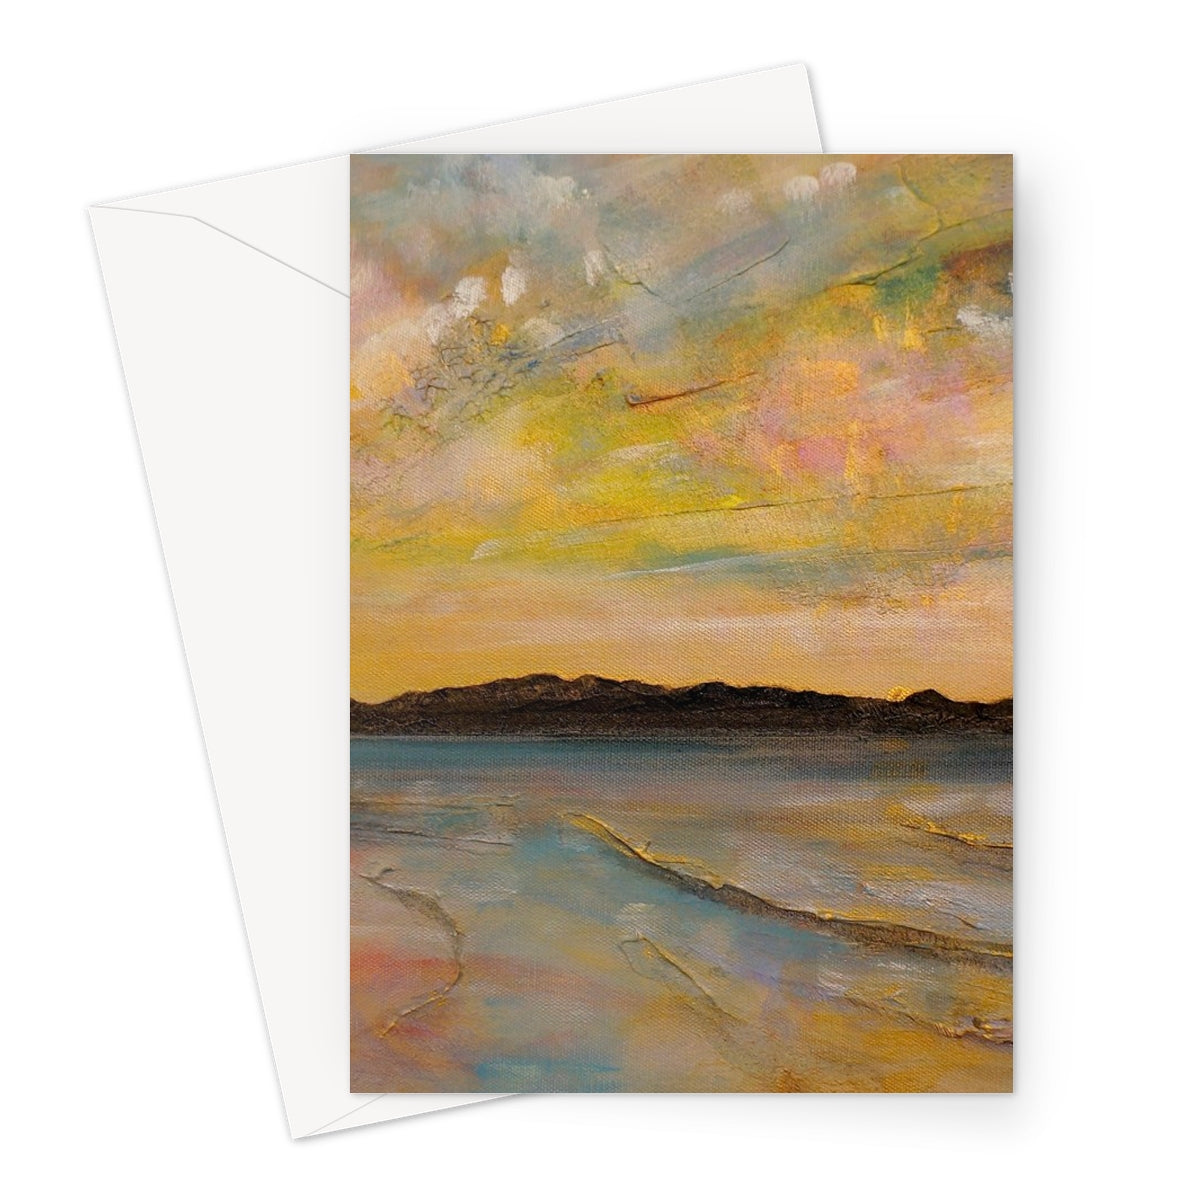 Vallay Island North Uist Art Gifts Greeting Card-Greetings Cards-Hebridean Islands Art Gallery-A5 Portrait-10 Cards-Paintings, Prints, Homeware, Art Gifts From Scotland By Scottish Artist Kevin Hunter